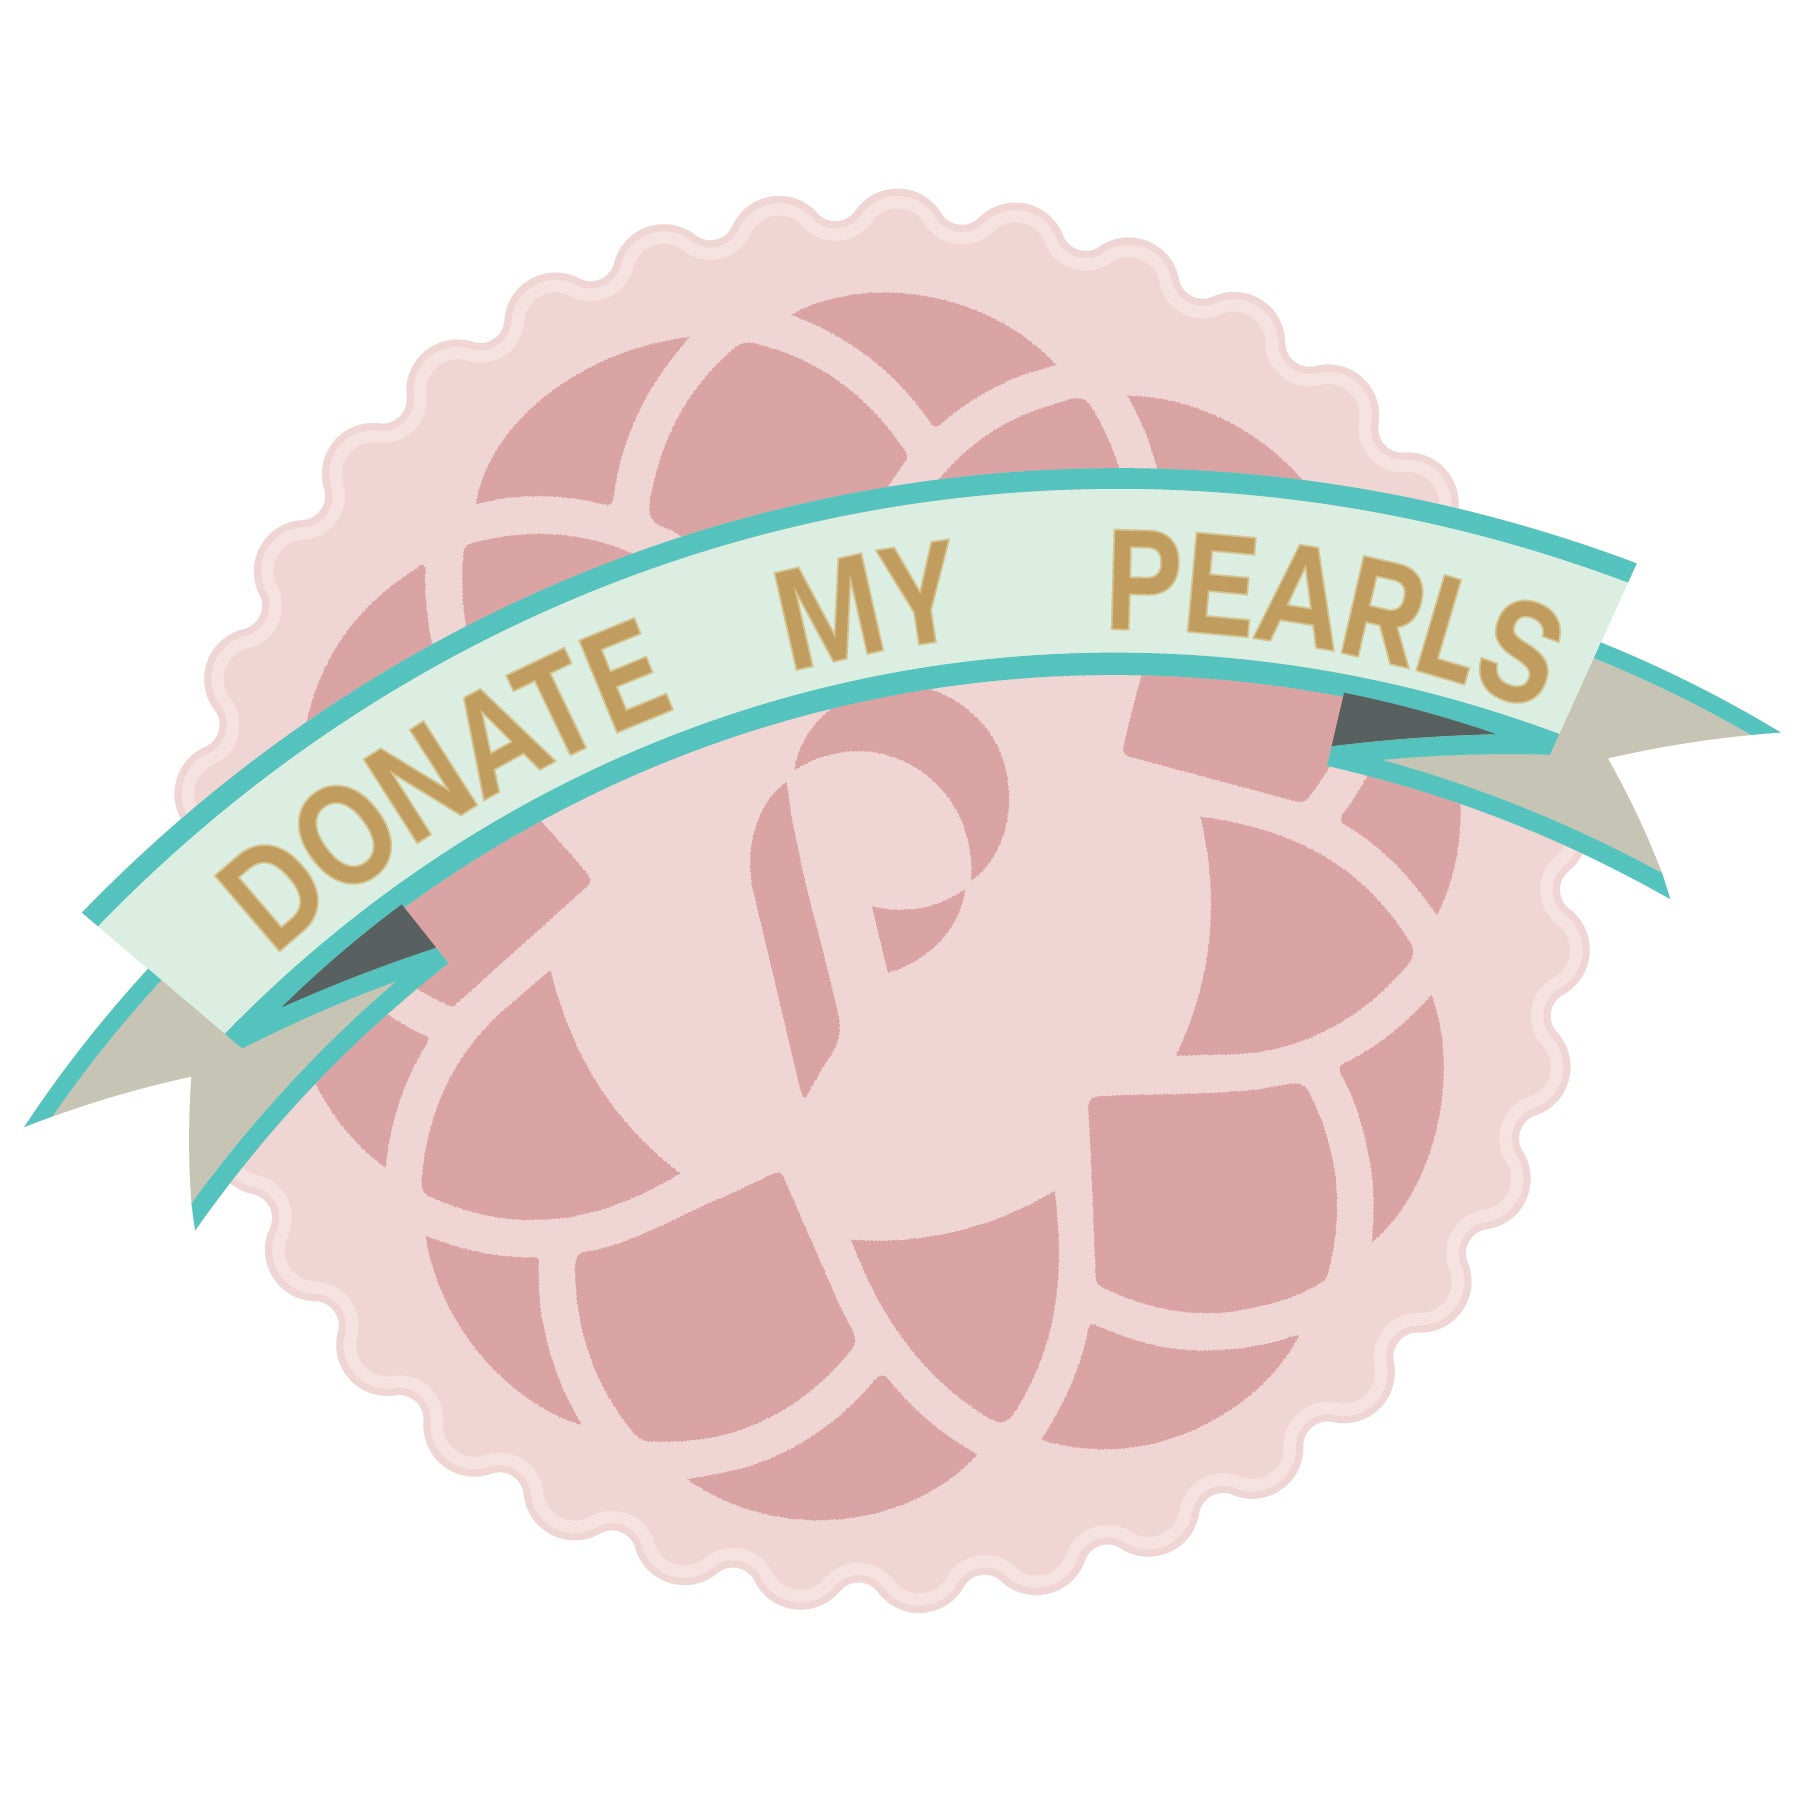 Donate My Pearls